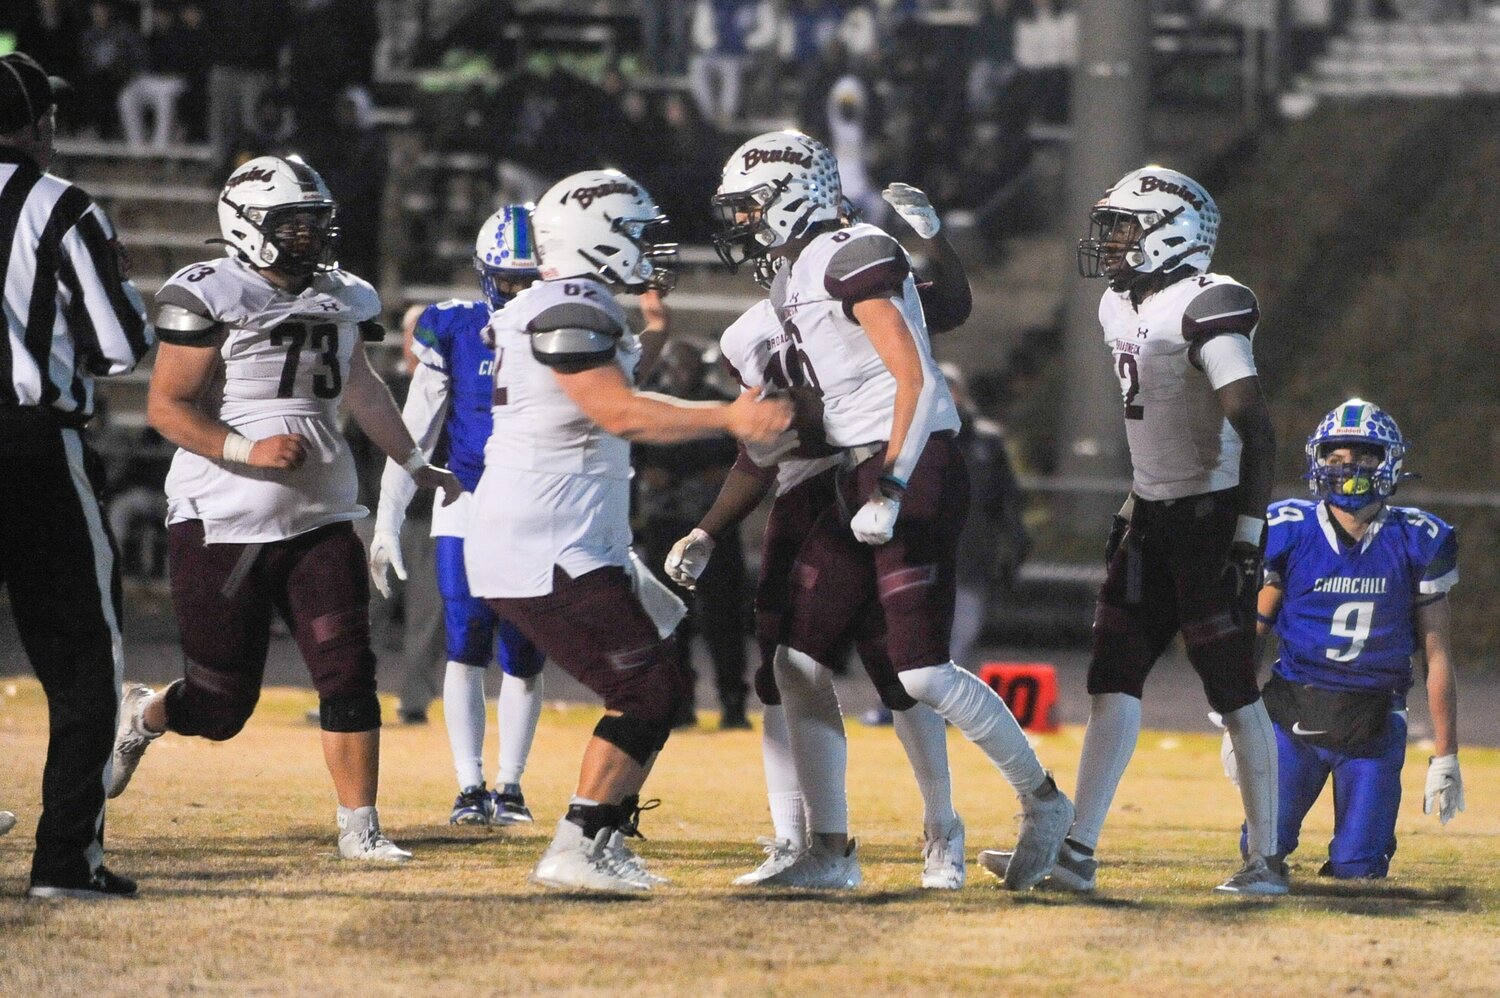 Branden Stahl (62) and Joey Smargissi (6) celebrated a Broadneck touchdown.